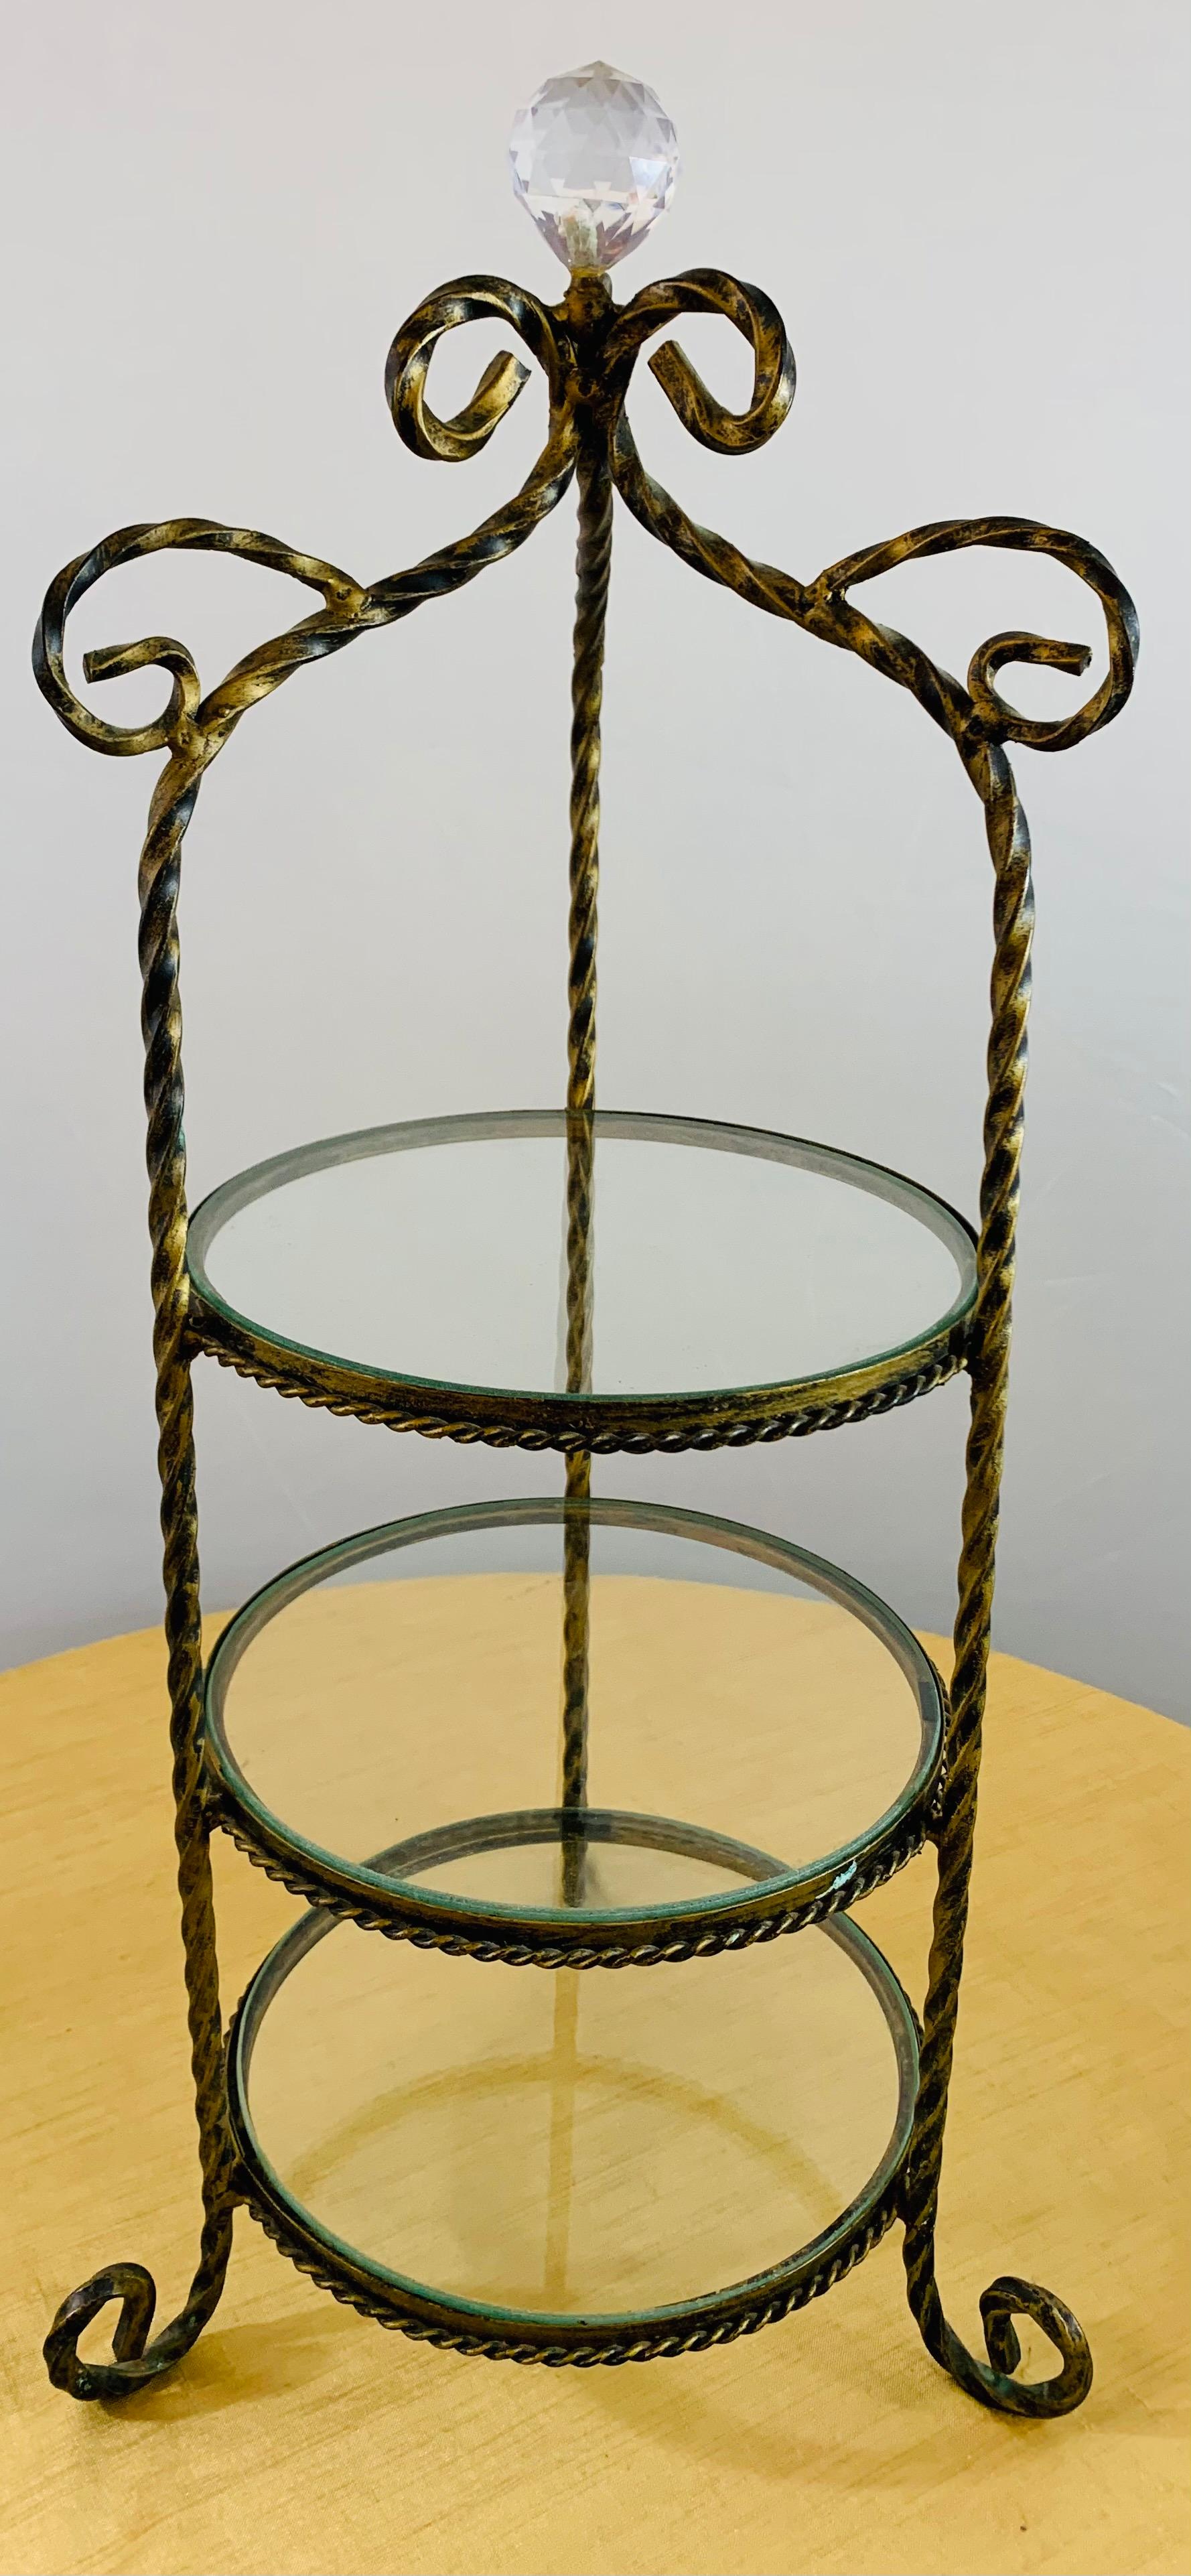 A vintage diminutive French handmade wrought iron étagère. Featuring round glass shelves and scroll feet and a crystal prism on the top, the decorative étagère is finely gilt painted in an antiqued fashion.


Dimensions: 23